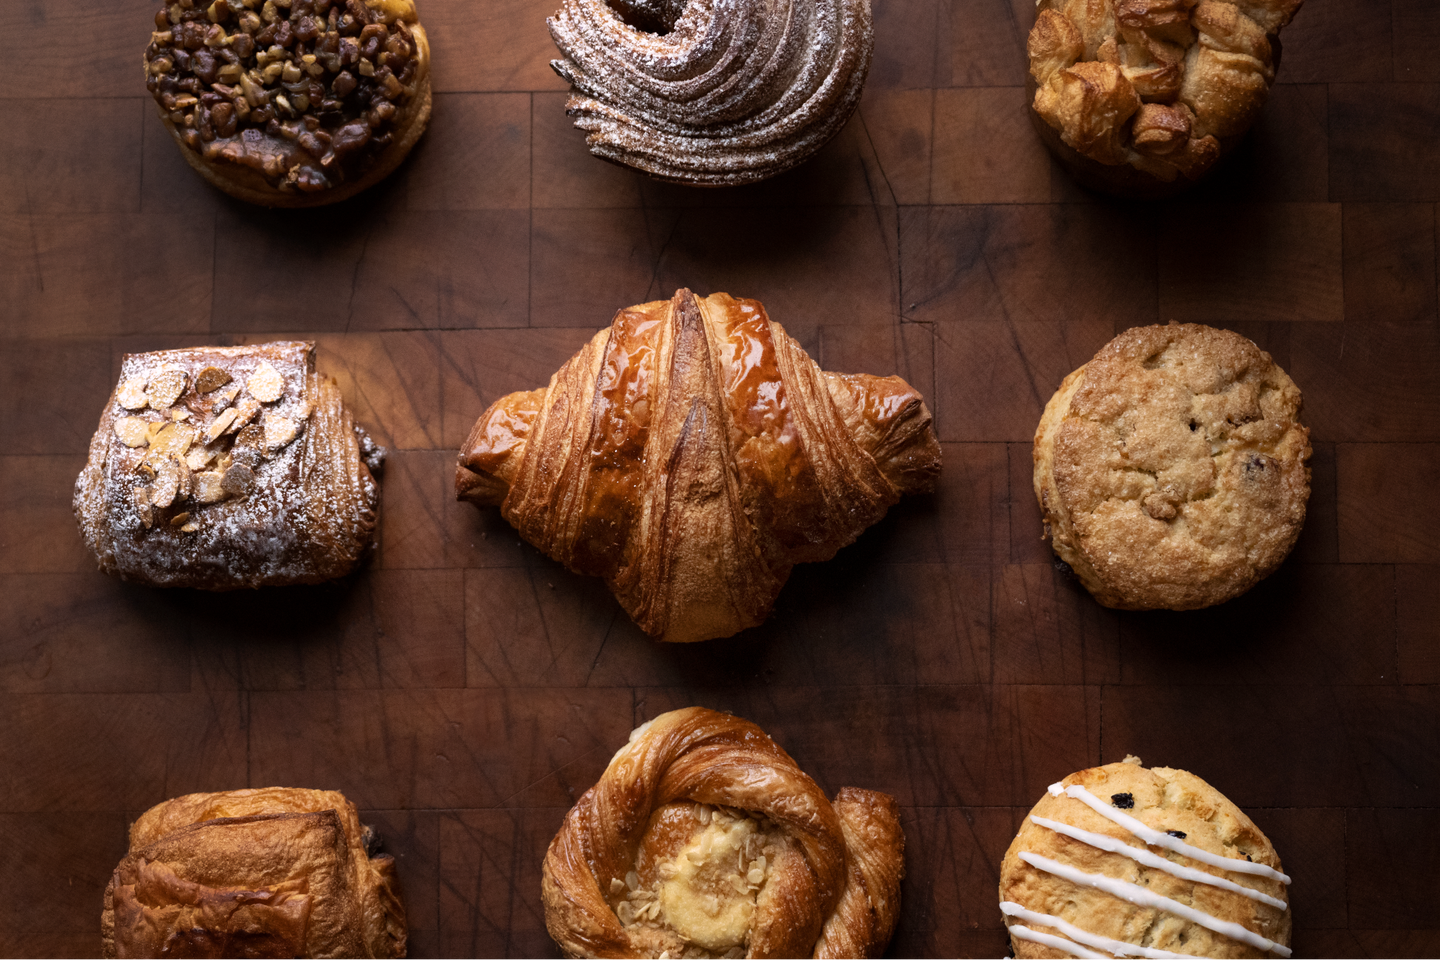 Assorted Pastries from Bread Alone